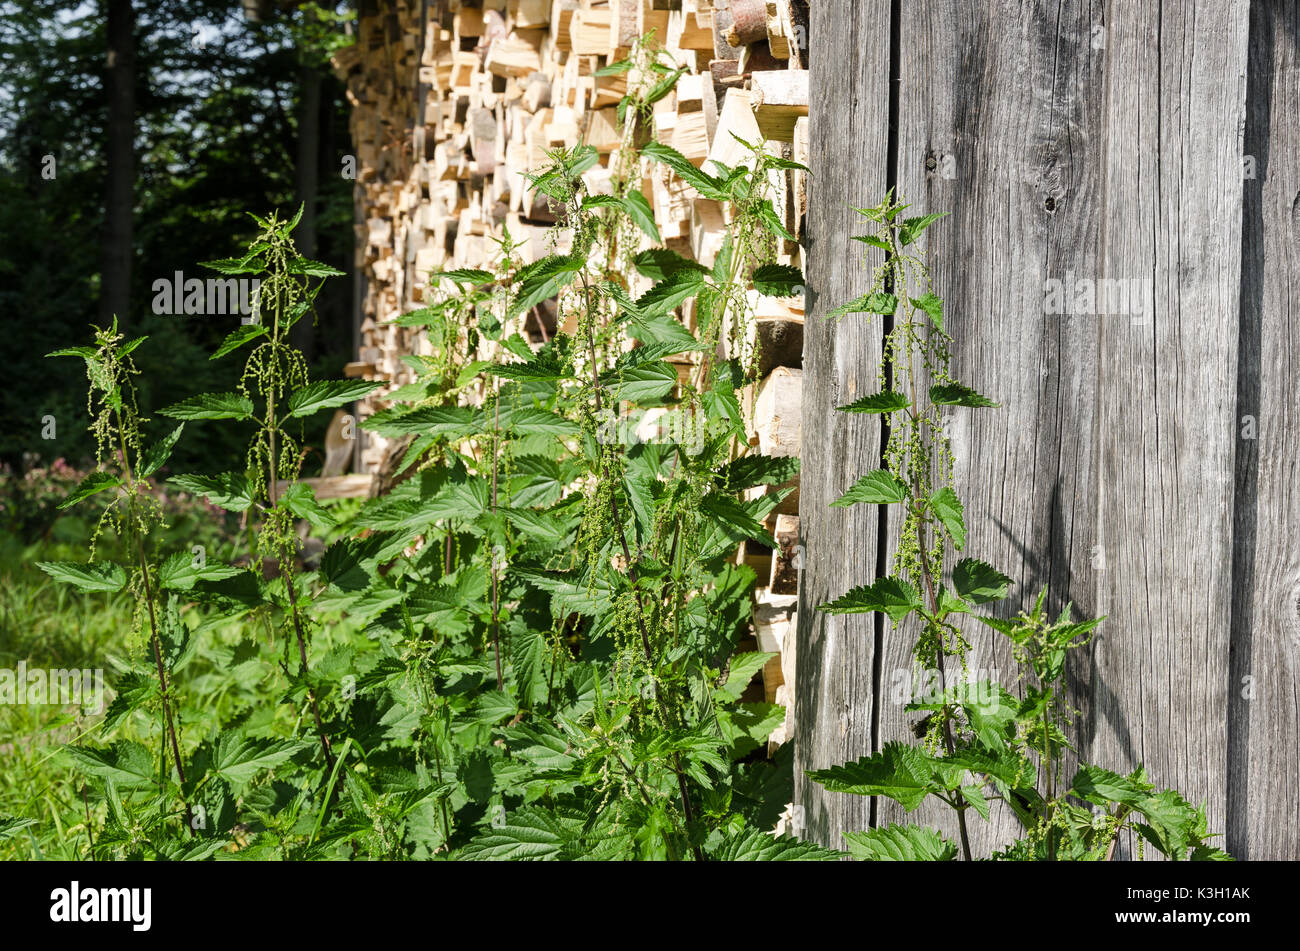 Stinging nettles next to a woodshed. Common nettles, Urtica dioica, in front of a weathered wooden wall and stacked firewood. Natural still life photo Stock Photo